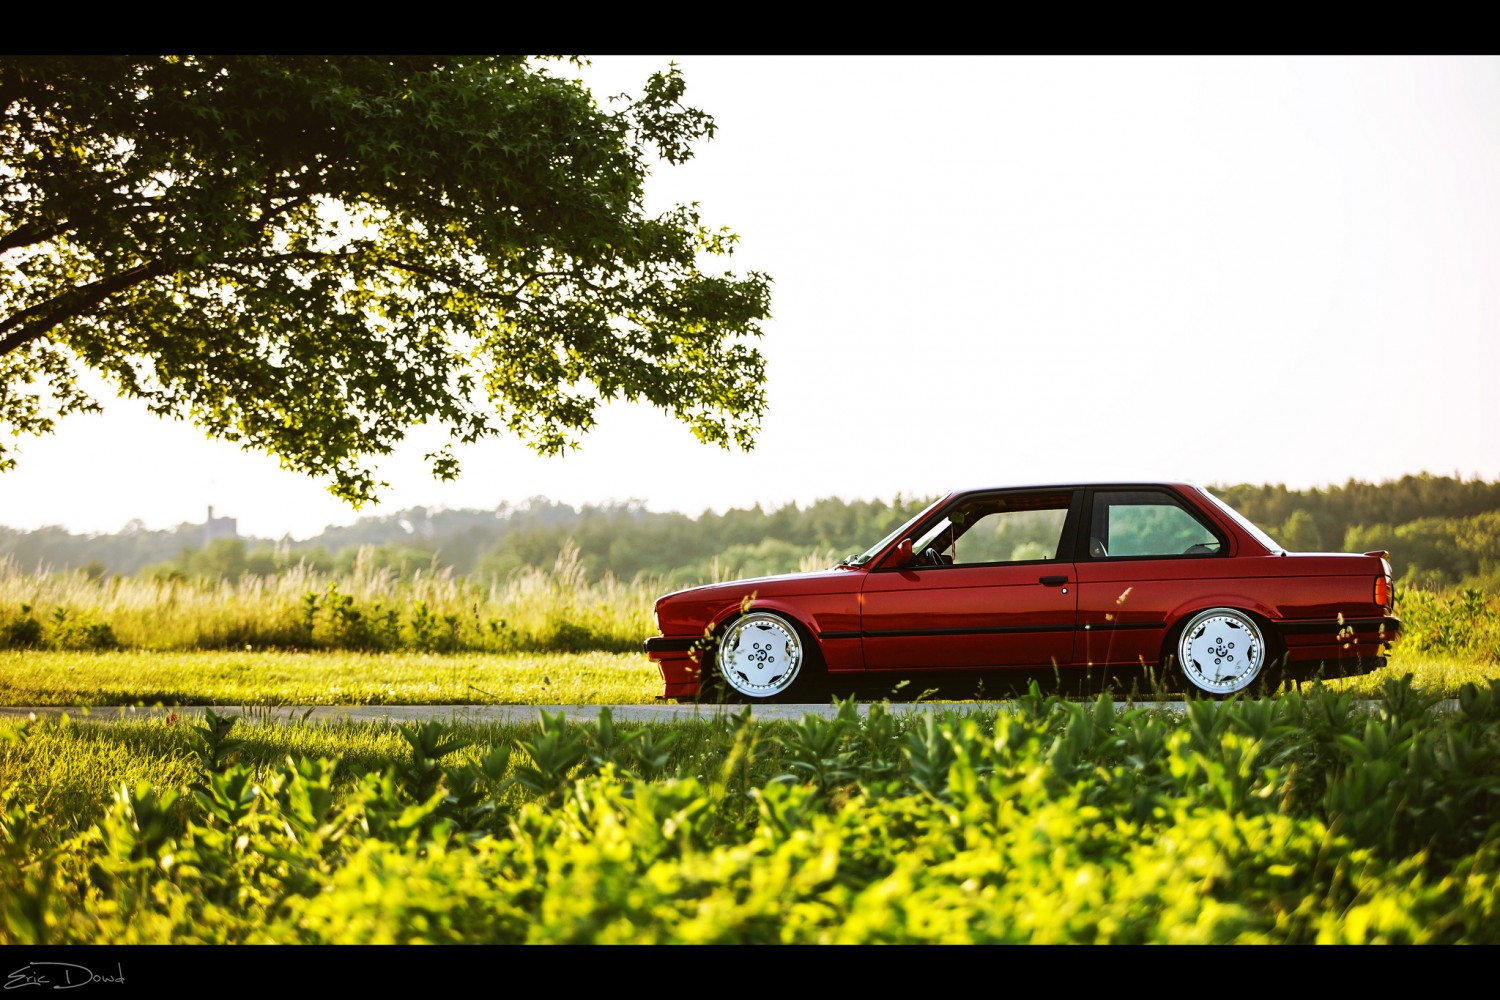 Awesome Photo Awesome Bmw E30 Stancenation™ Form Function